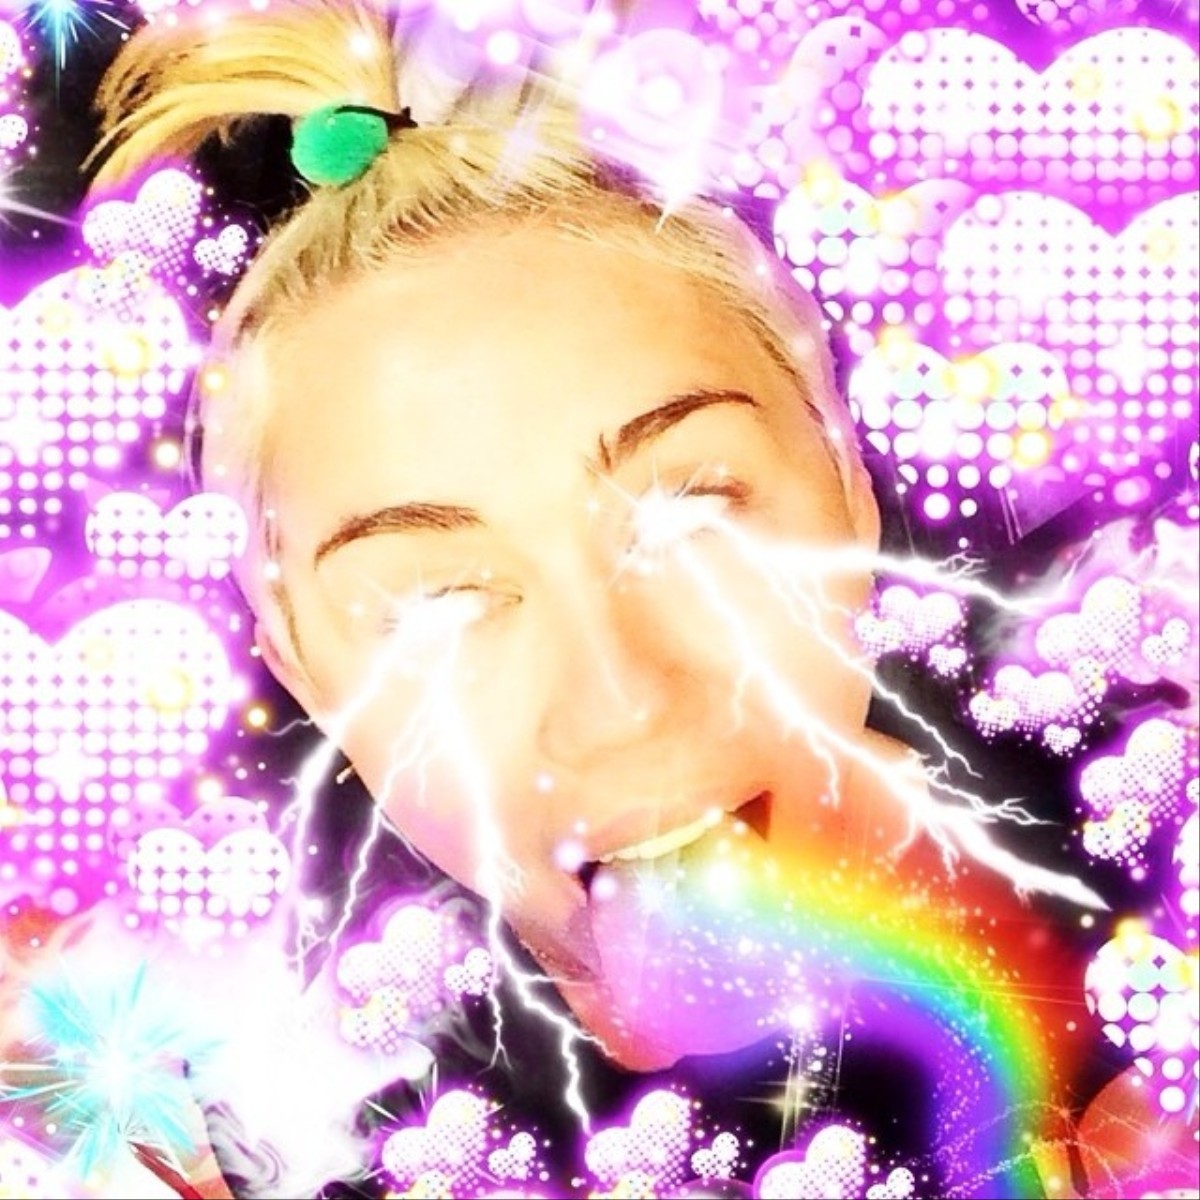 Miley Cyrus Gets Ass Fucked - Miley Cyrus' Instagram Account Is Better Than a Million Art Museums Combined